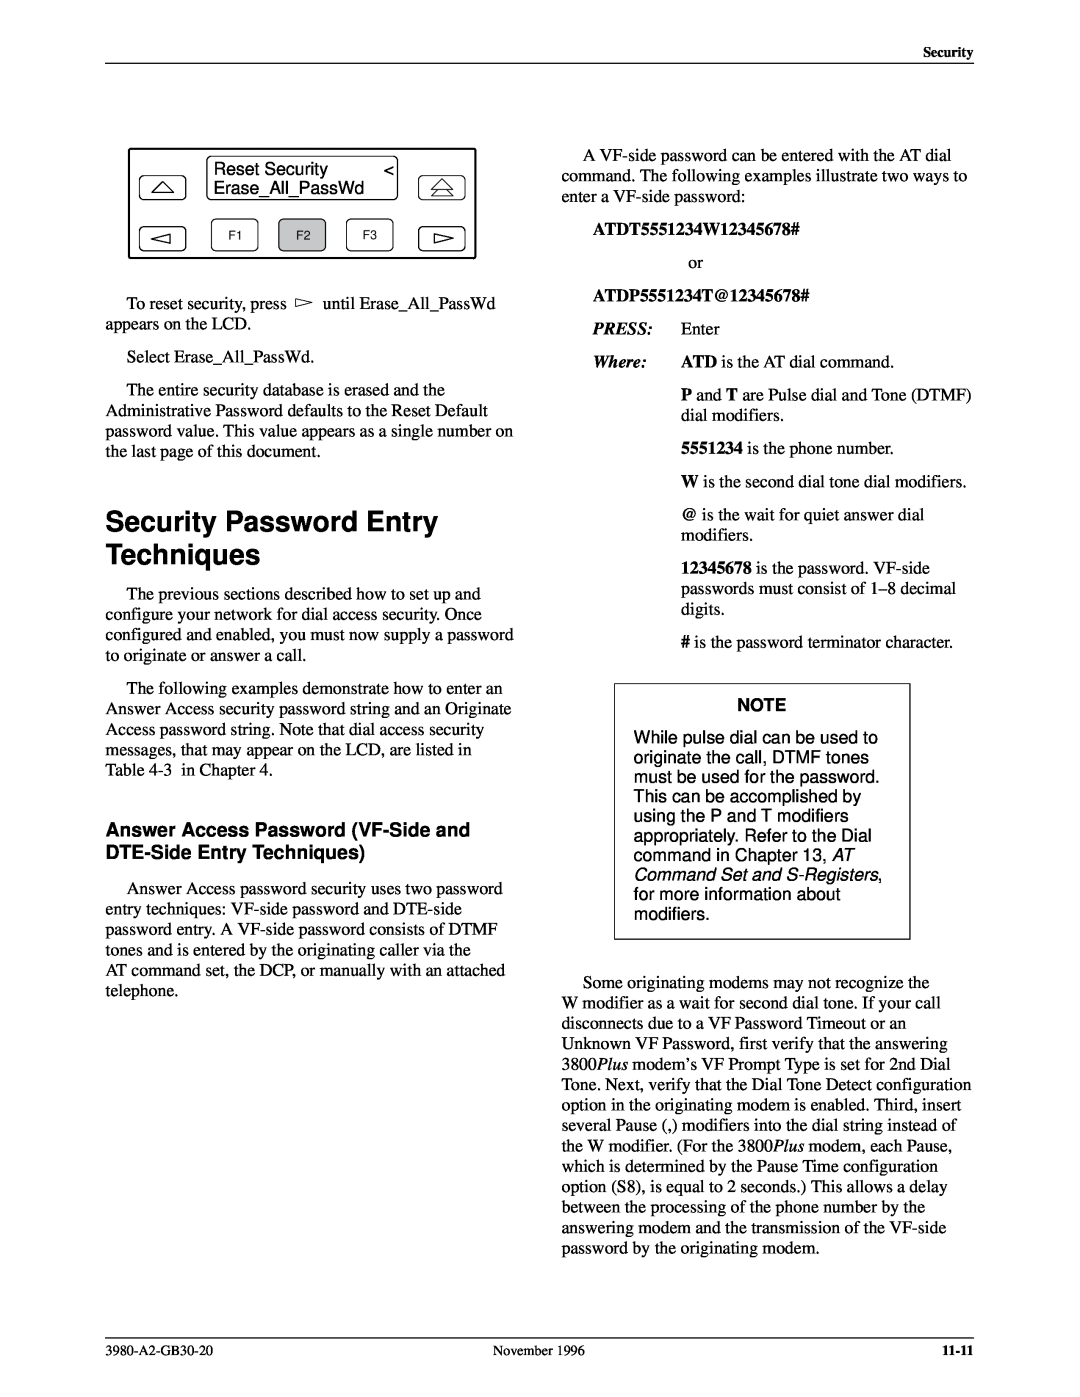 Paradyne 3800PLUS manual Security Password Entry Techniques, Answer Access Password VF-Side and DTE-Side Entry Techniques 